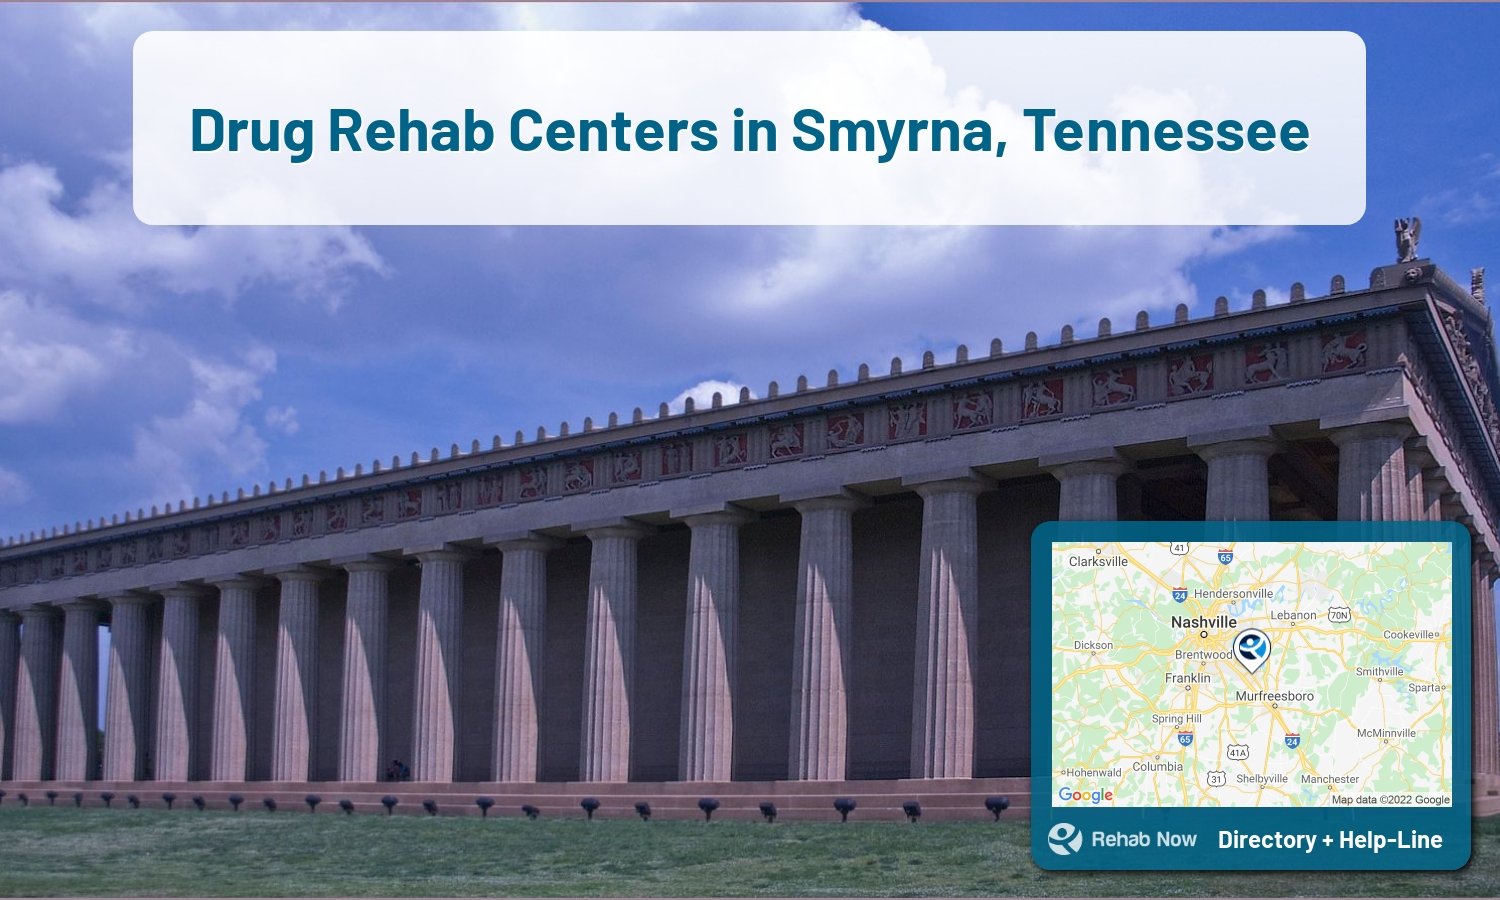 Smyrna, TN Treatment Centers. Find drug rehab in Smyrna, Tennessee, or detox and treatment programs. Get the right help now!